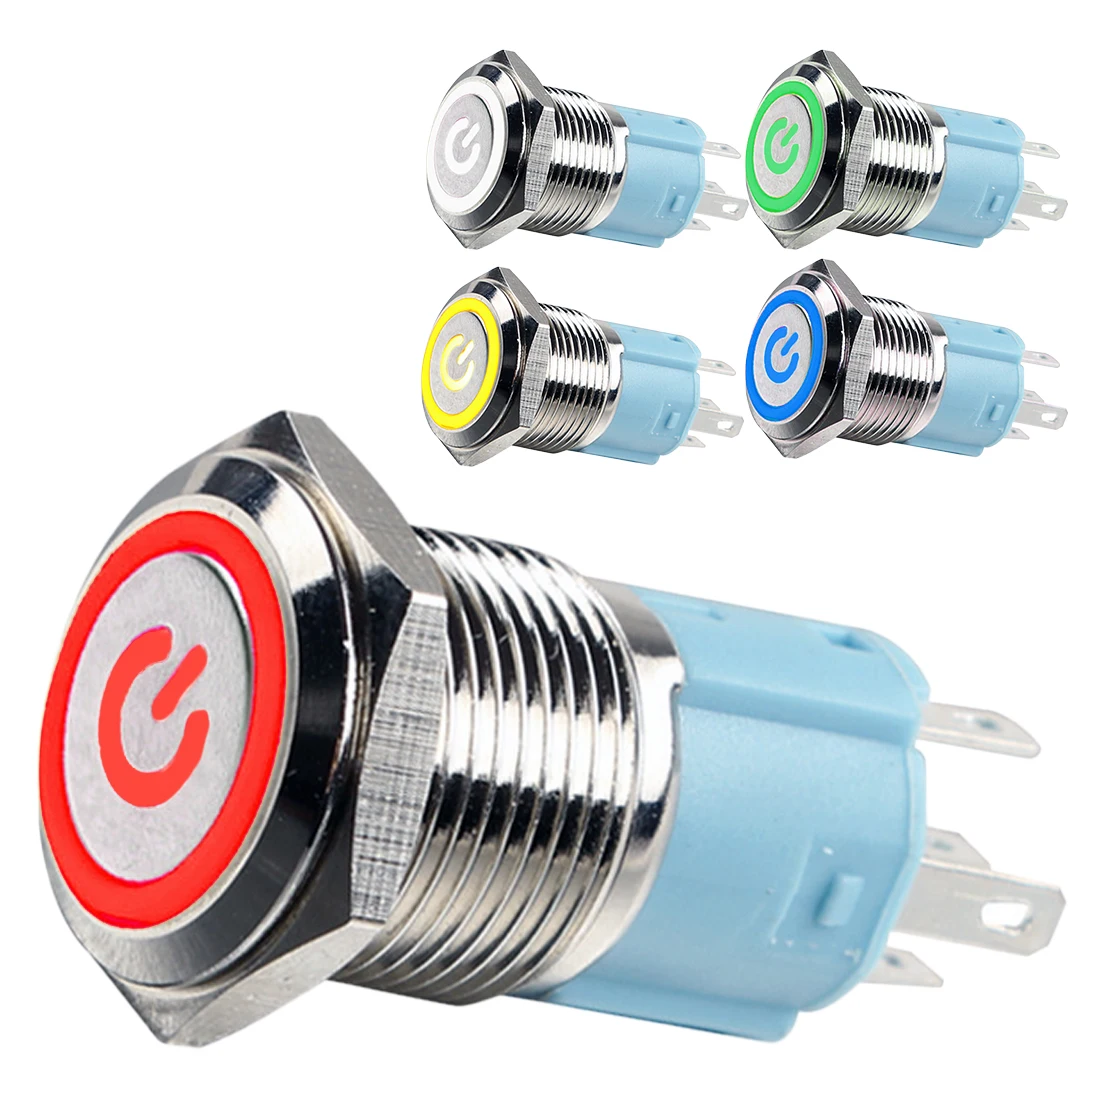 

16mm Metal Push Button Switch LED Power Mark Locking Latching Self-reset Momentary 1NO 1NC Red Blue Yellow Green White